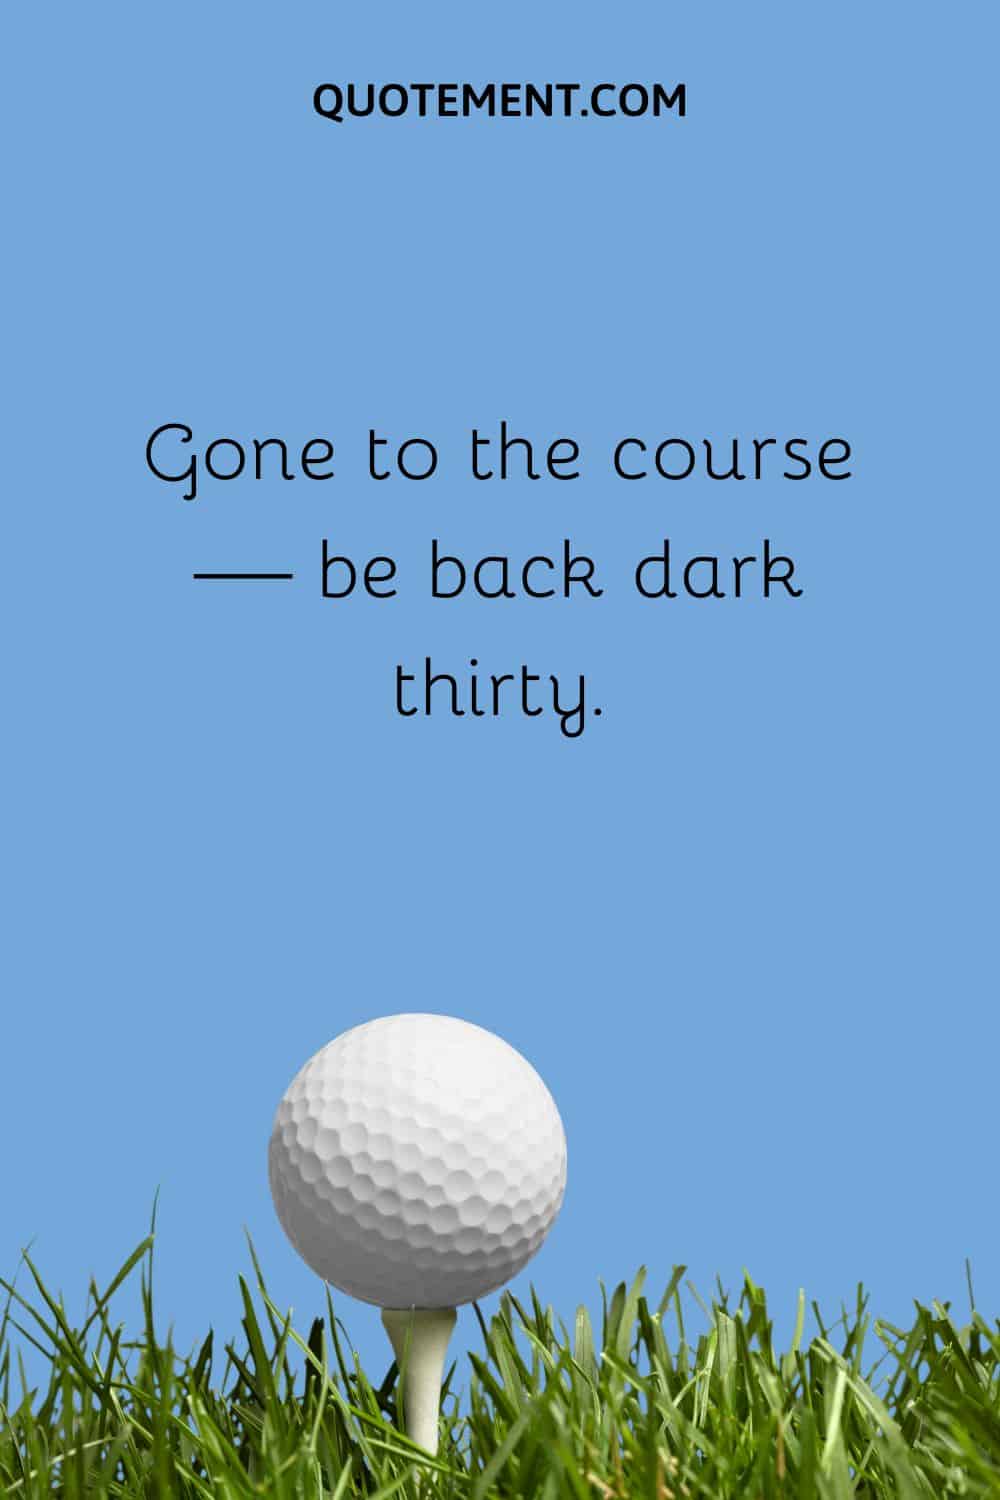 Gone to the course